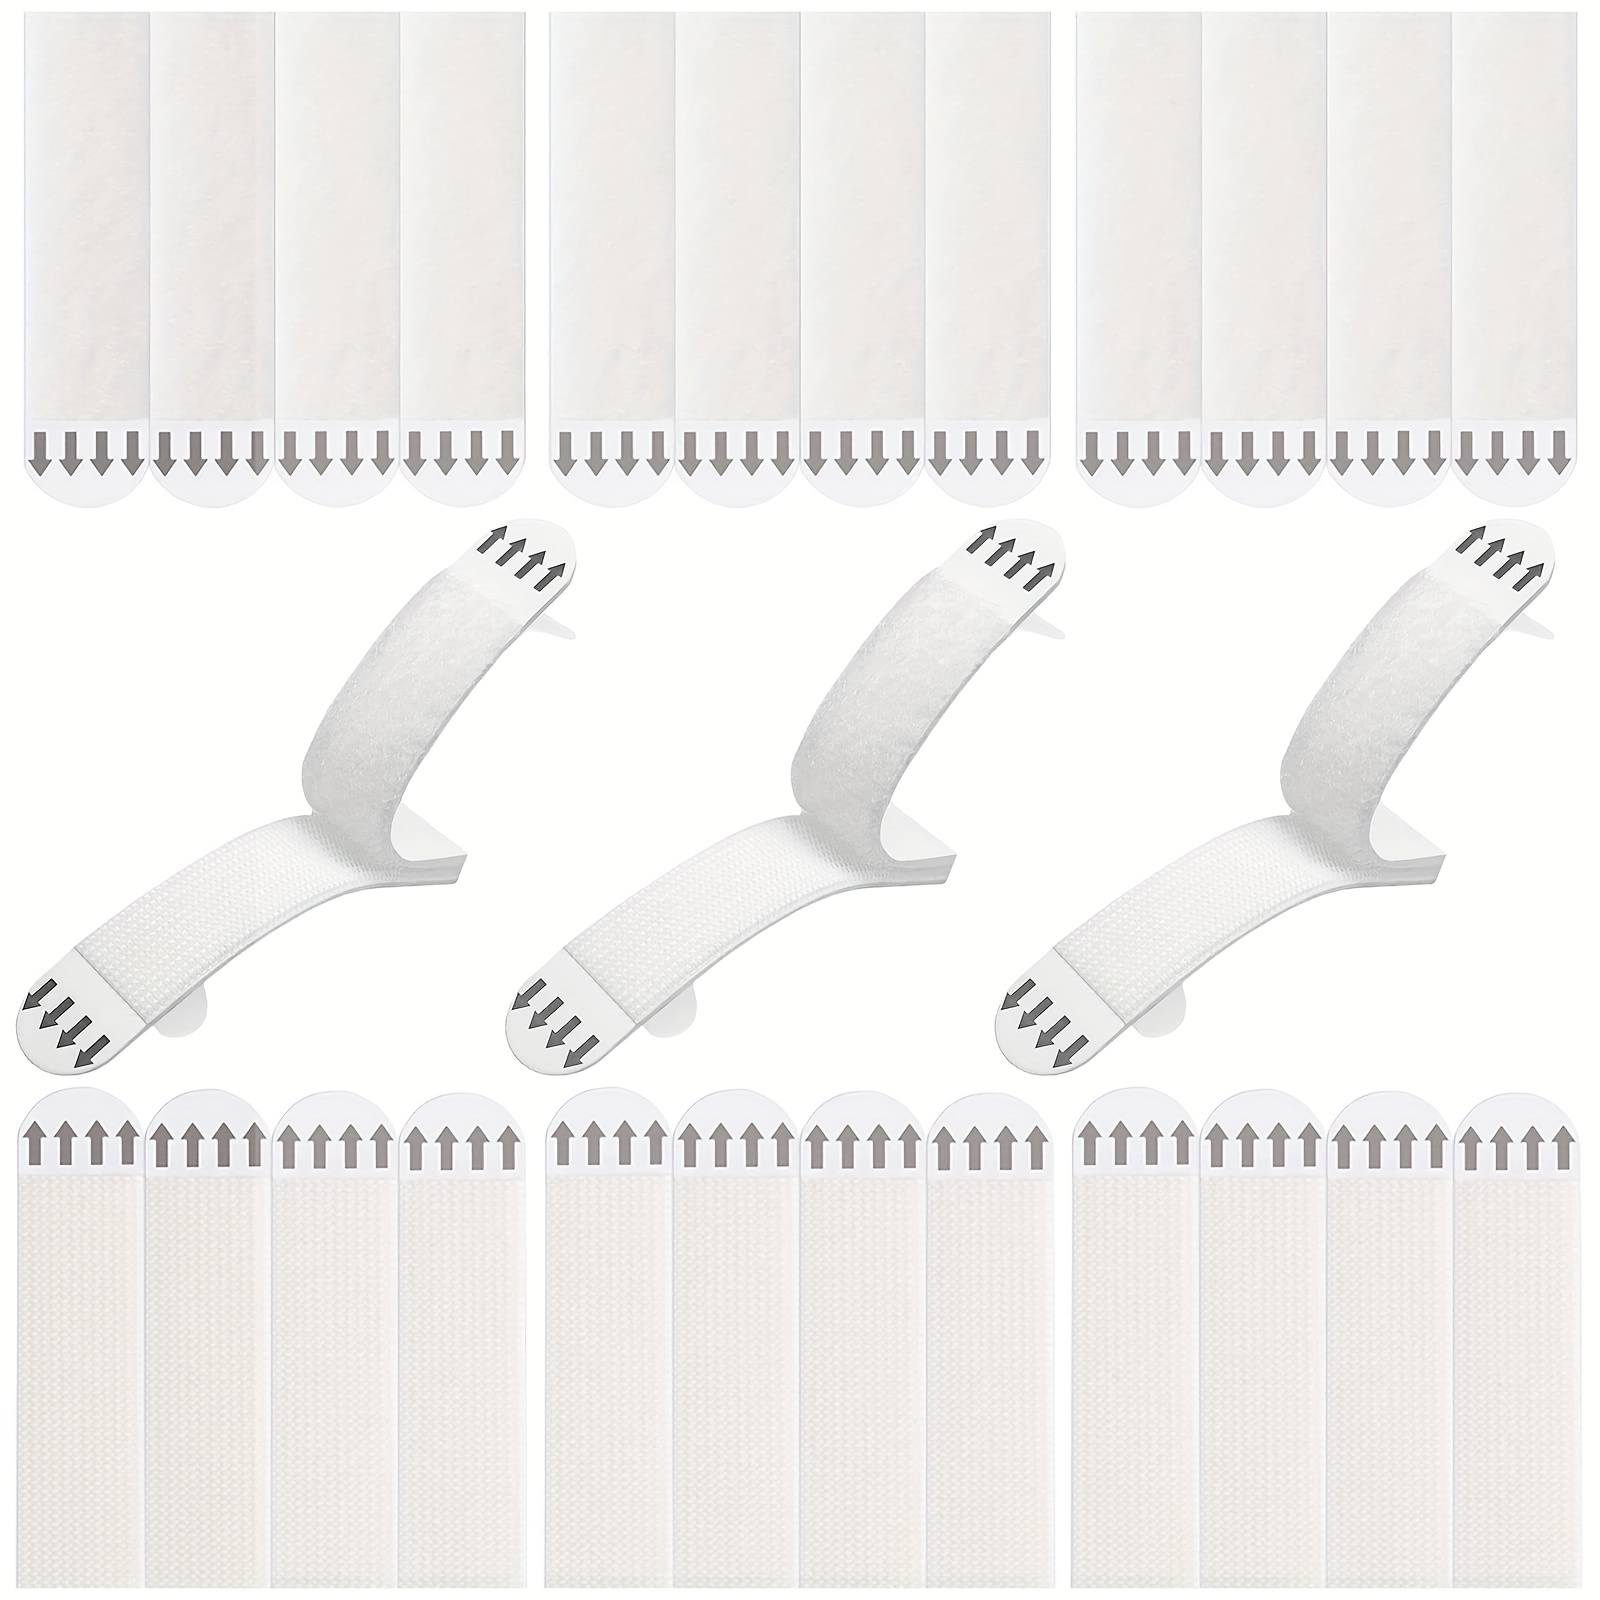  48 Pairs Picture Hanging Strips, White Adhesive Hook